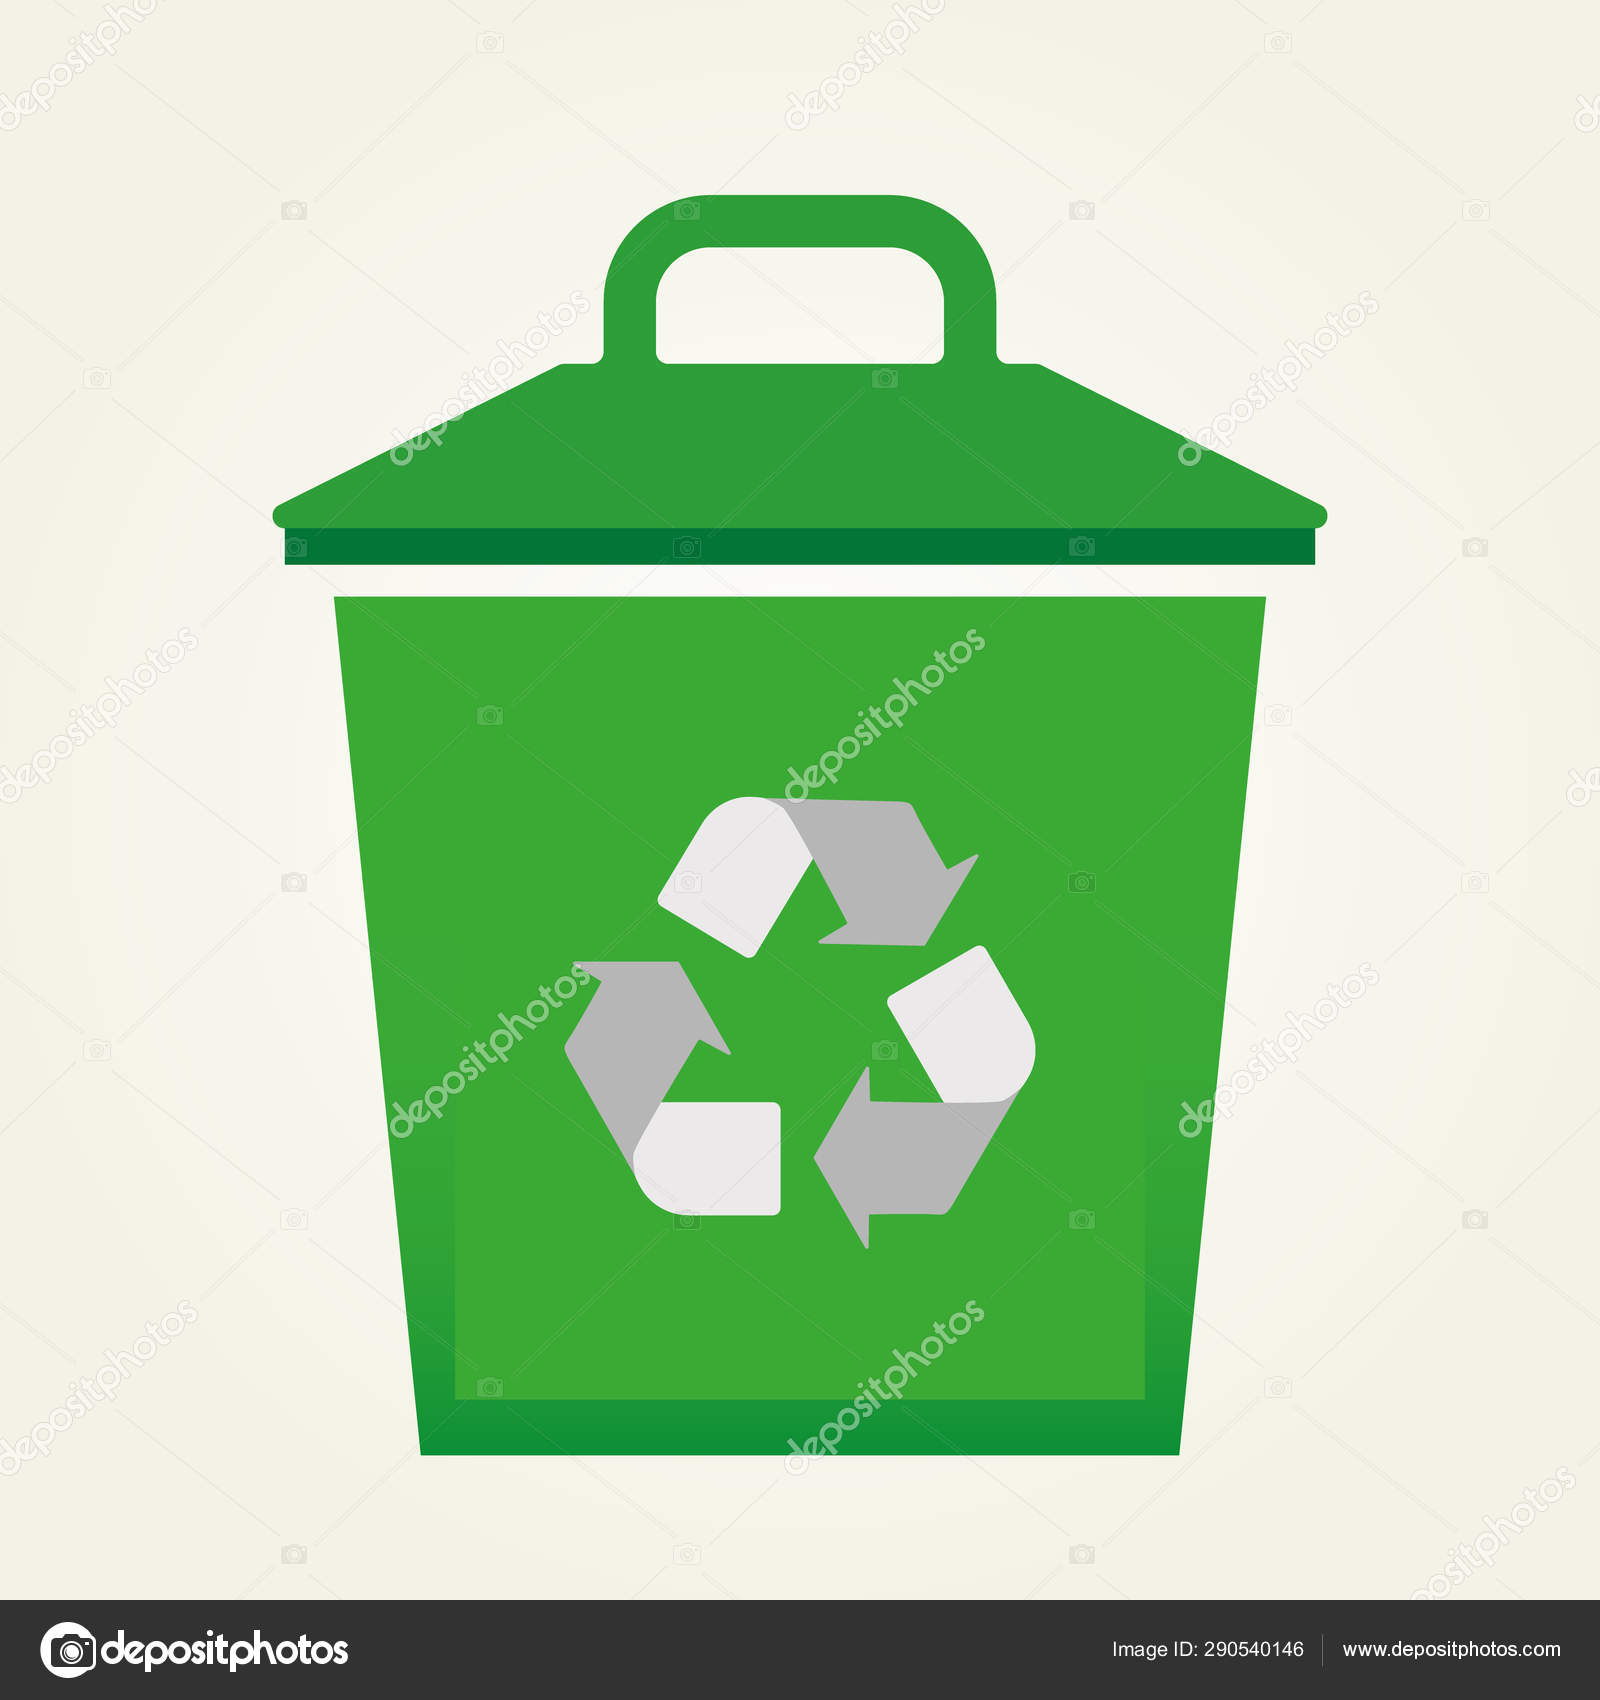 Recycling Bin Trash Box Recycling Trash Icon White Background Vector Illustration Eps 10 Vector Image By C Dariachekman Vector Stock